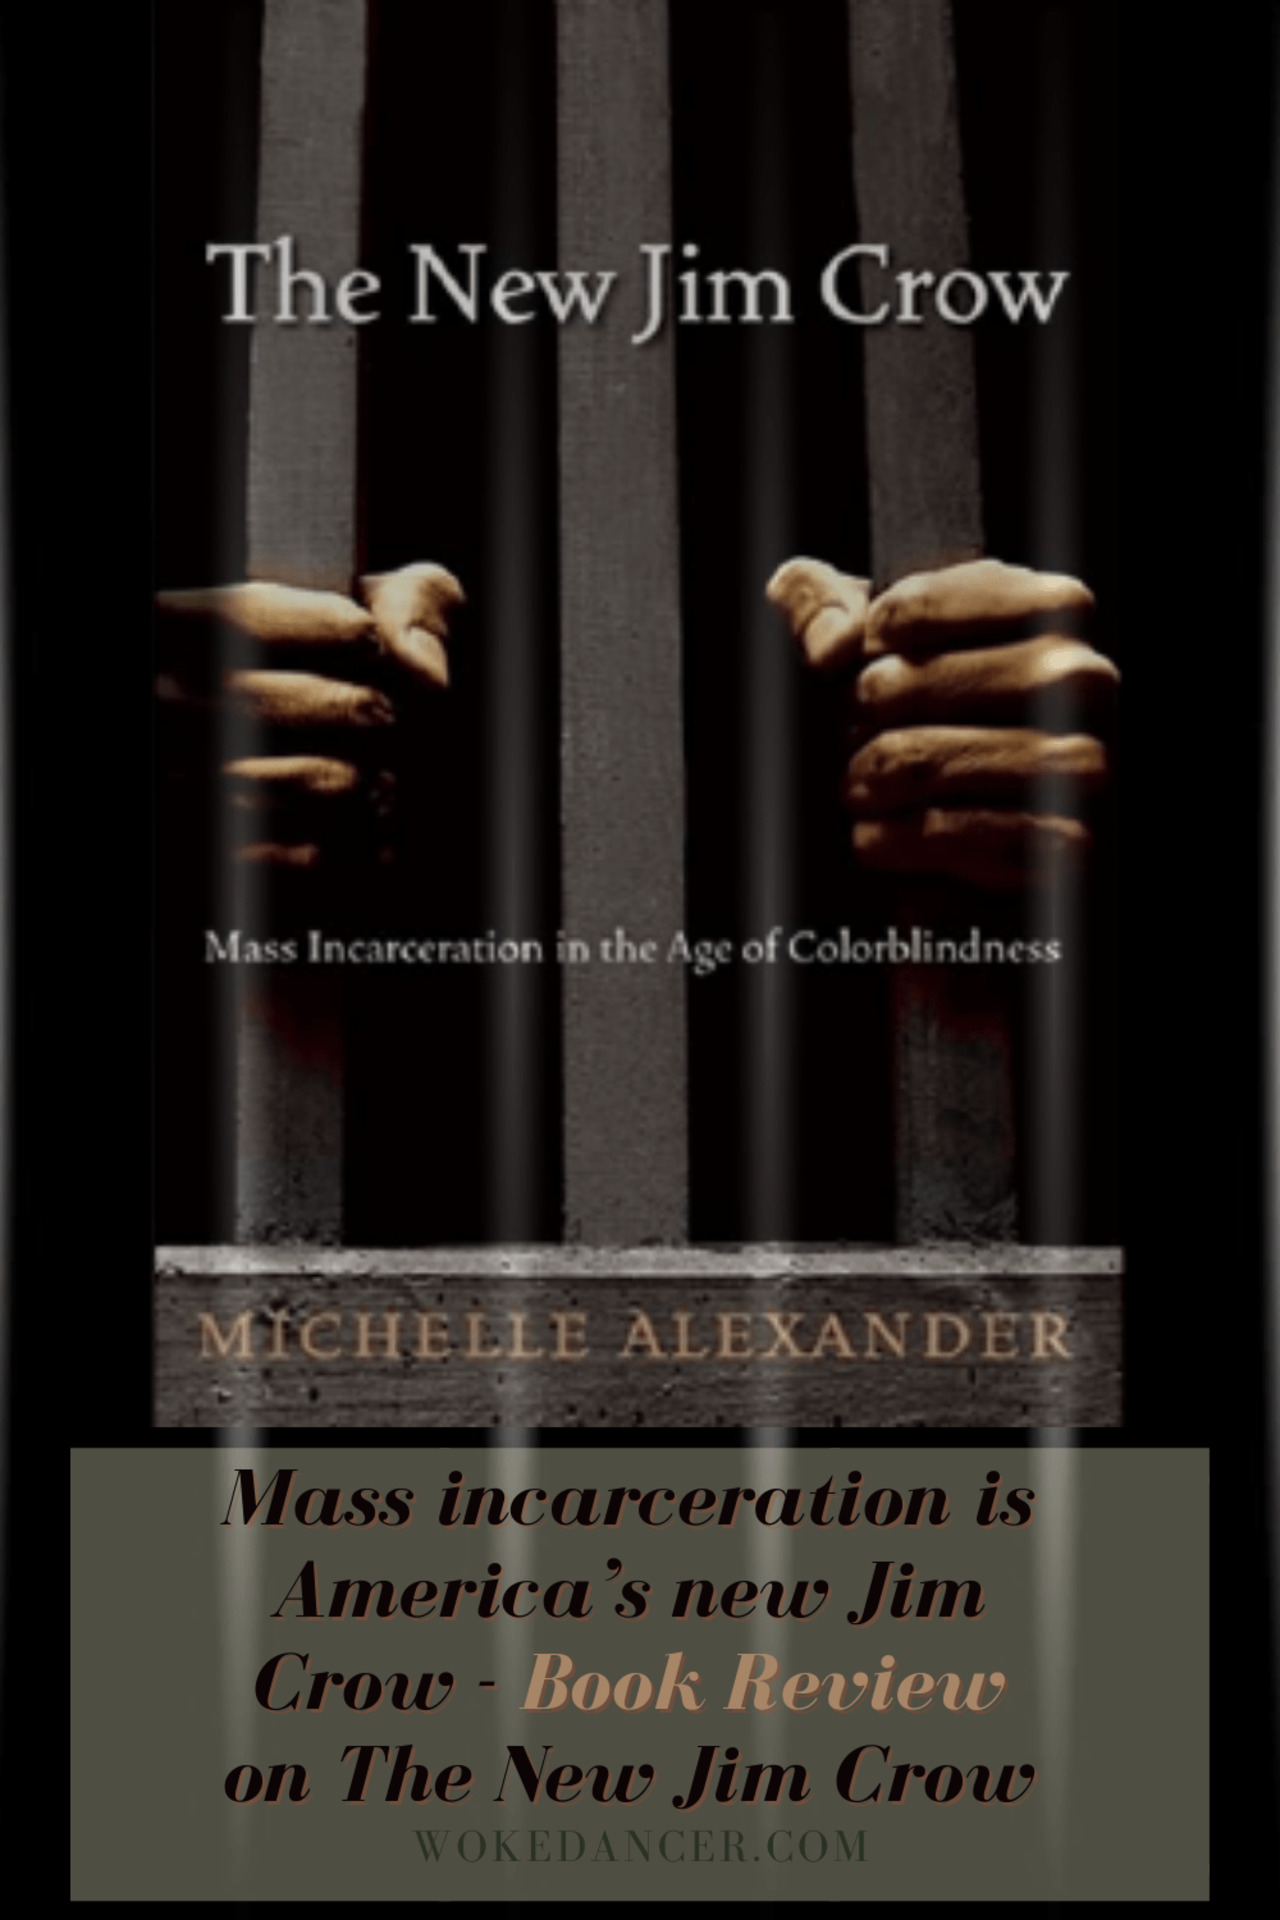 The New Jim Crow by Michelle Alexander - Book Review